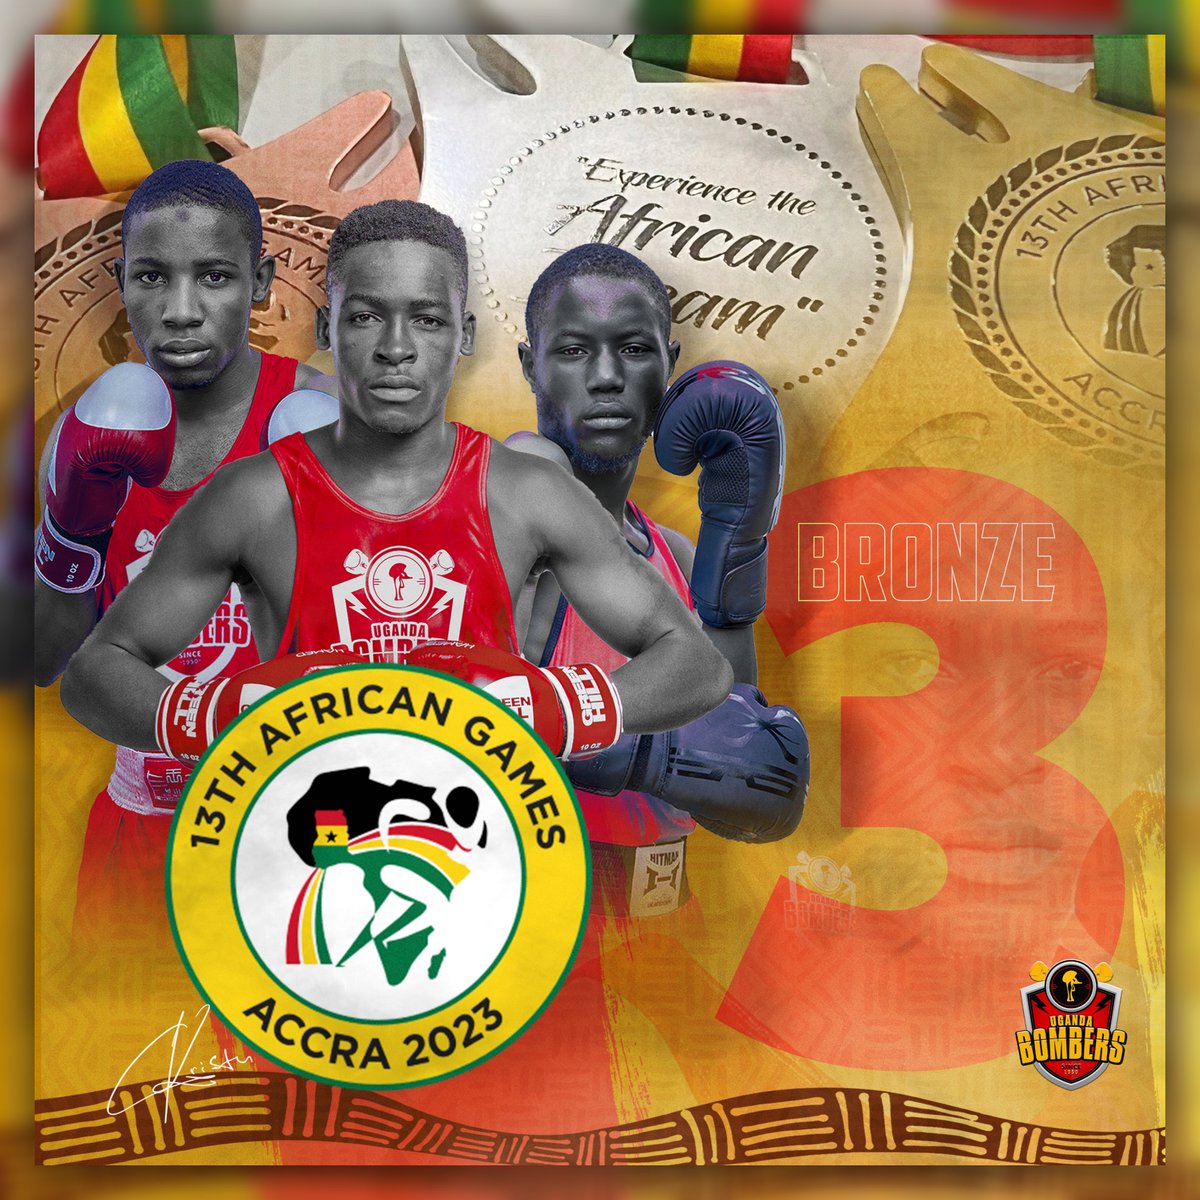 🥊🇺🇬After a nail-biting Semifinals, We managed to secure 3 Bronze🥉in this year's edition of the African Games, a commendable achievement for the team that represented our nation! #AfricanGames #AfricanGames2023 #Accra2023